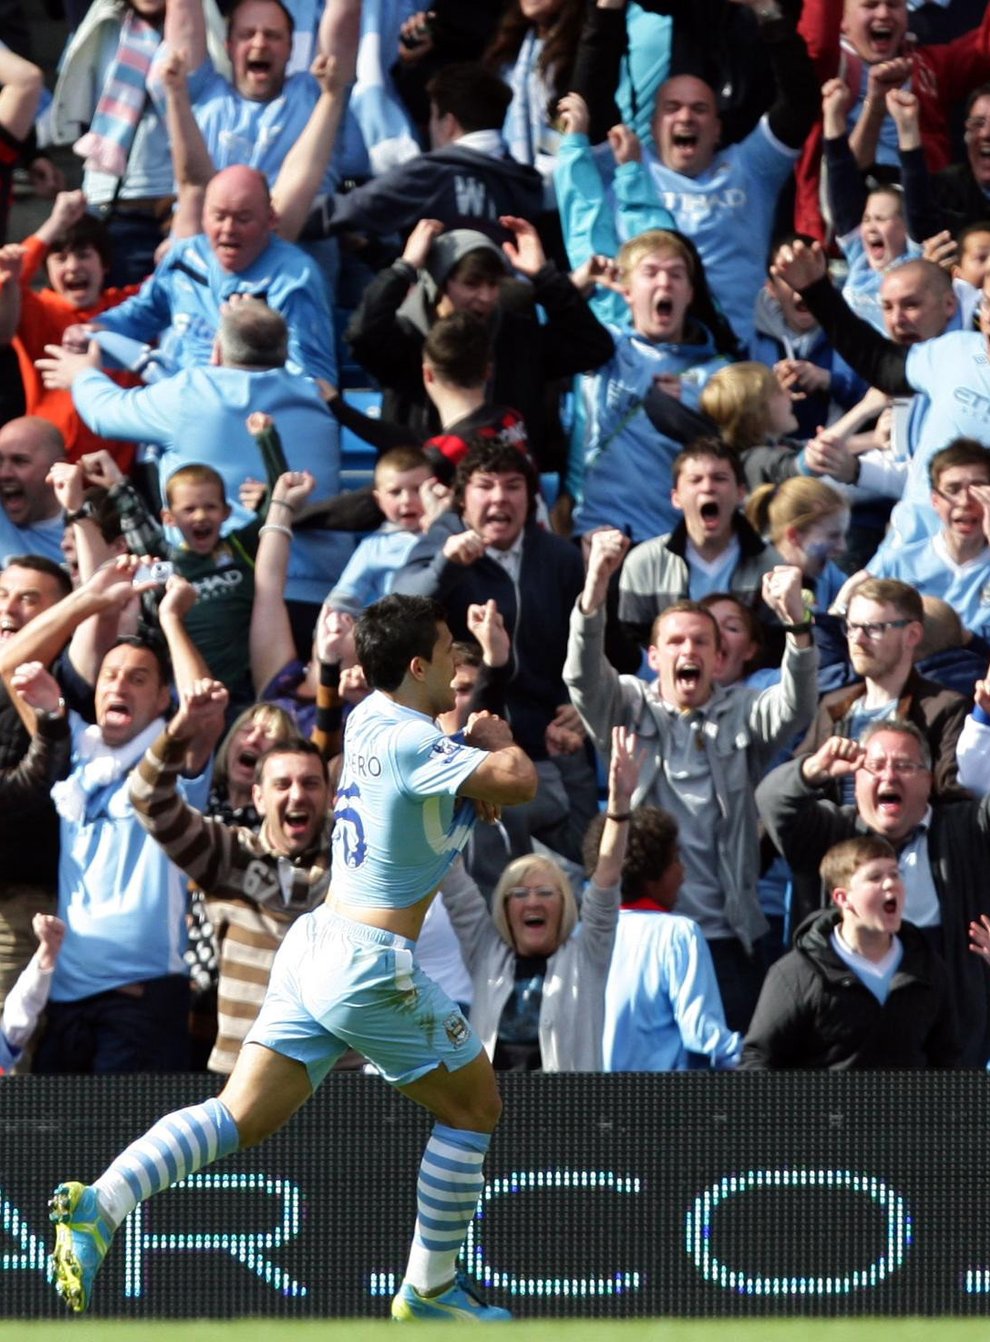 Manchester City’s Sergio Aguero celebrates his stoppage-time winner against QPR which clinched the 2011-12 Premier League title (Dave Thompson/PA)